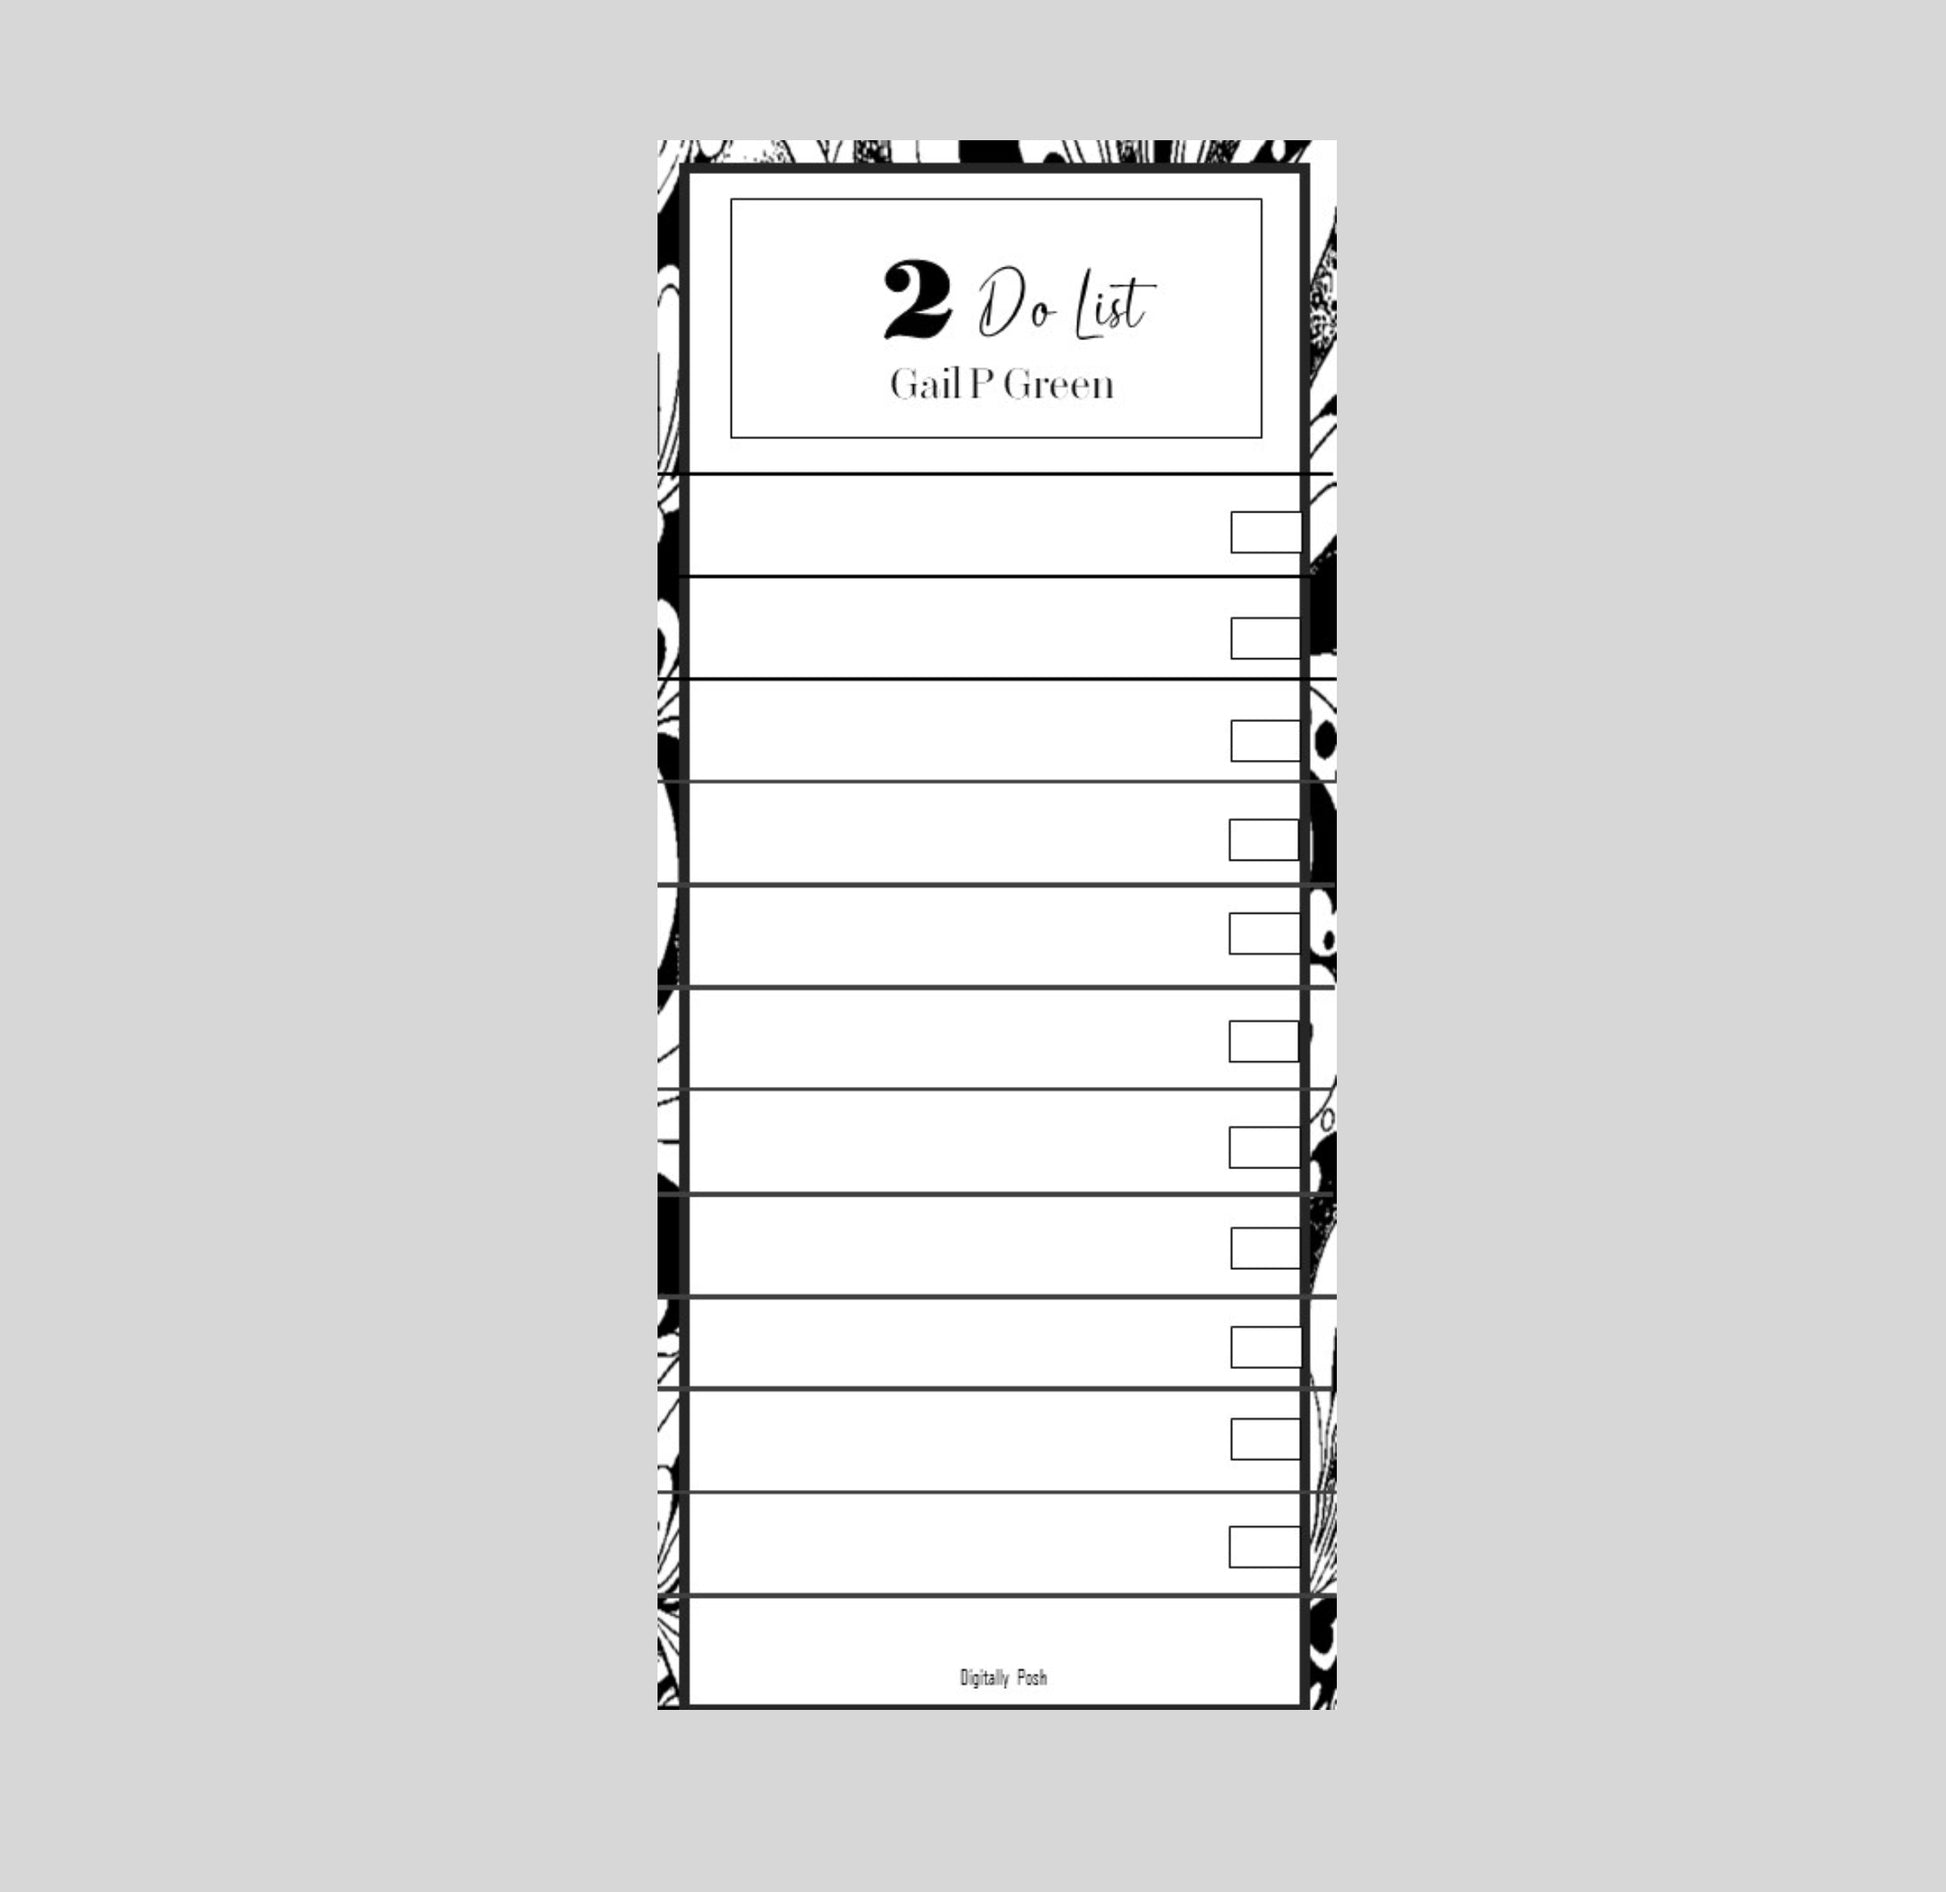 Personalized Notepad: To do list is a great way to stay organized; write down important information and tasks